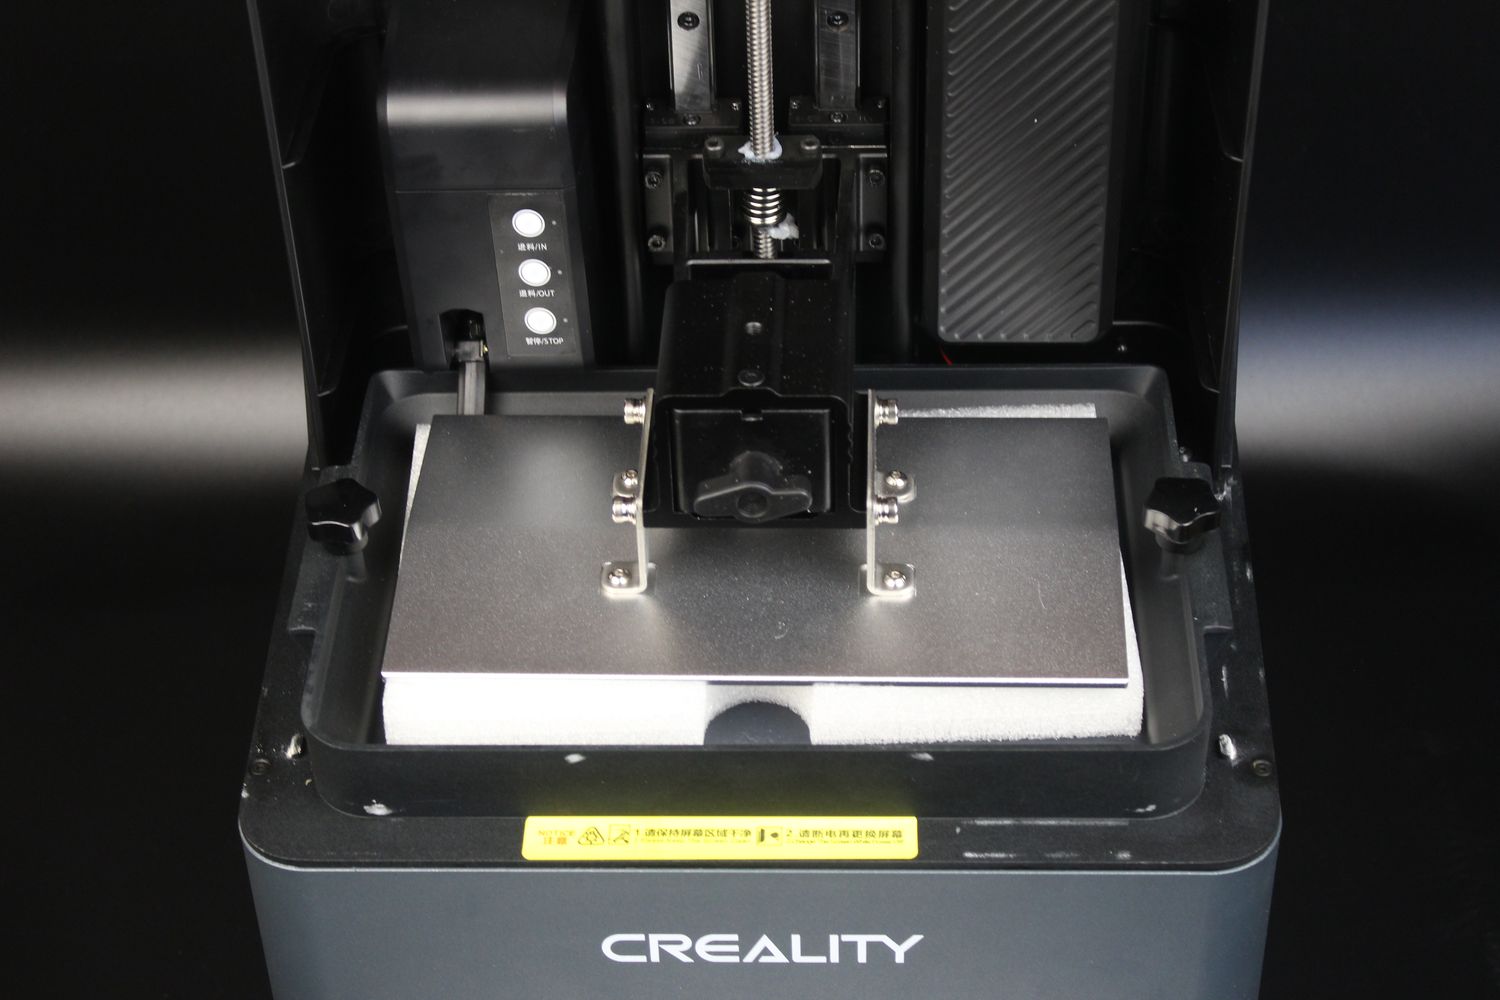 Creality Halot Mage Pro Review Packaging5 | Creality Halot Mage Pro Review: Great Prints, Bad Software